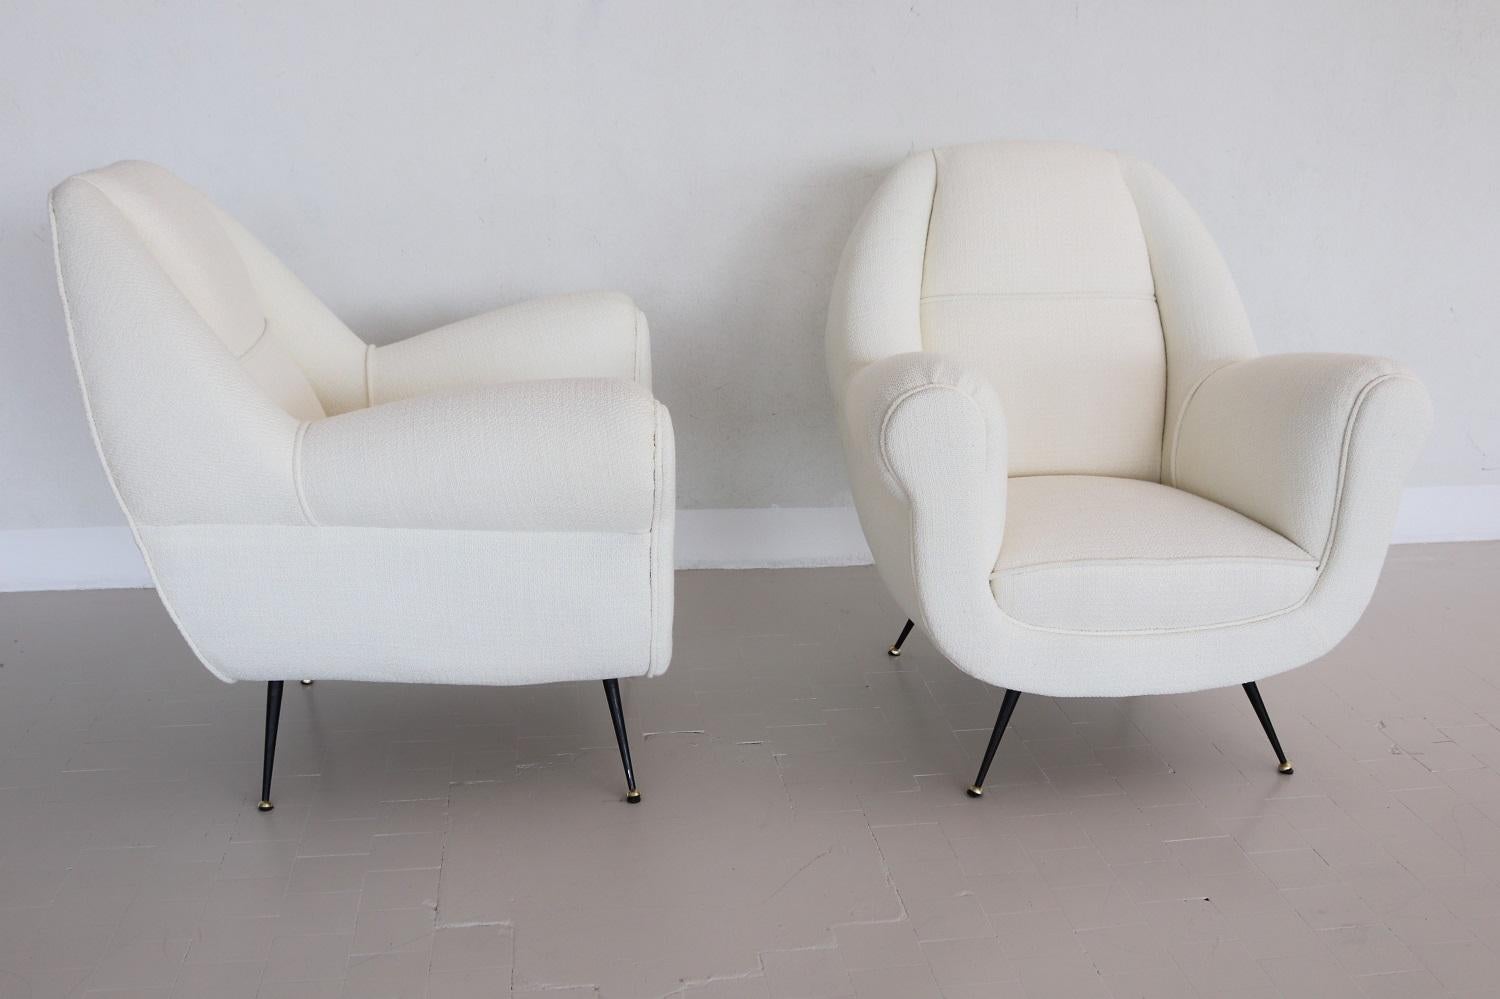 Italian Midcentury Armchairs in White Upholstery and Brass Stiletto Feet, 1960s For Sale 5